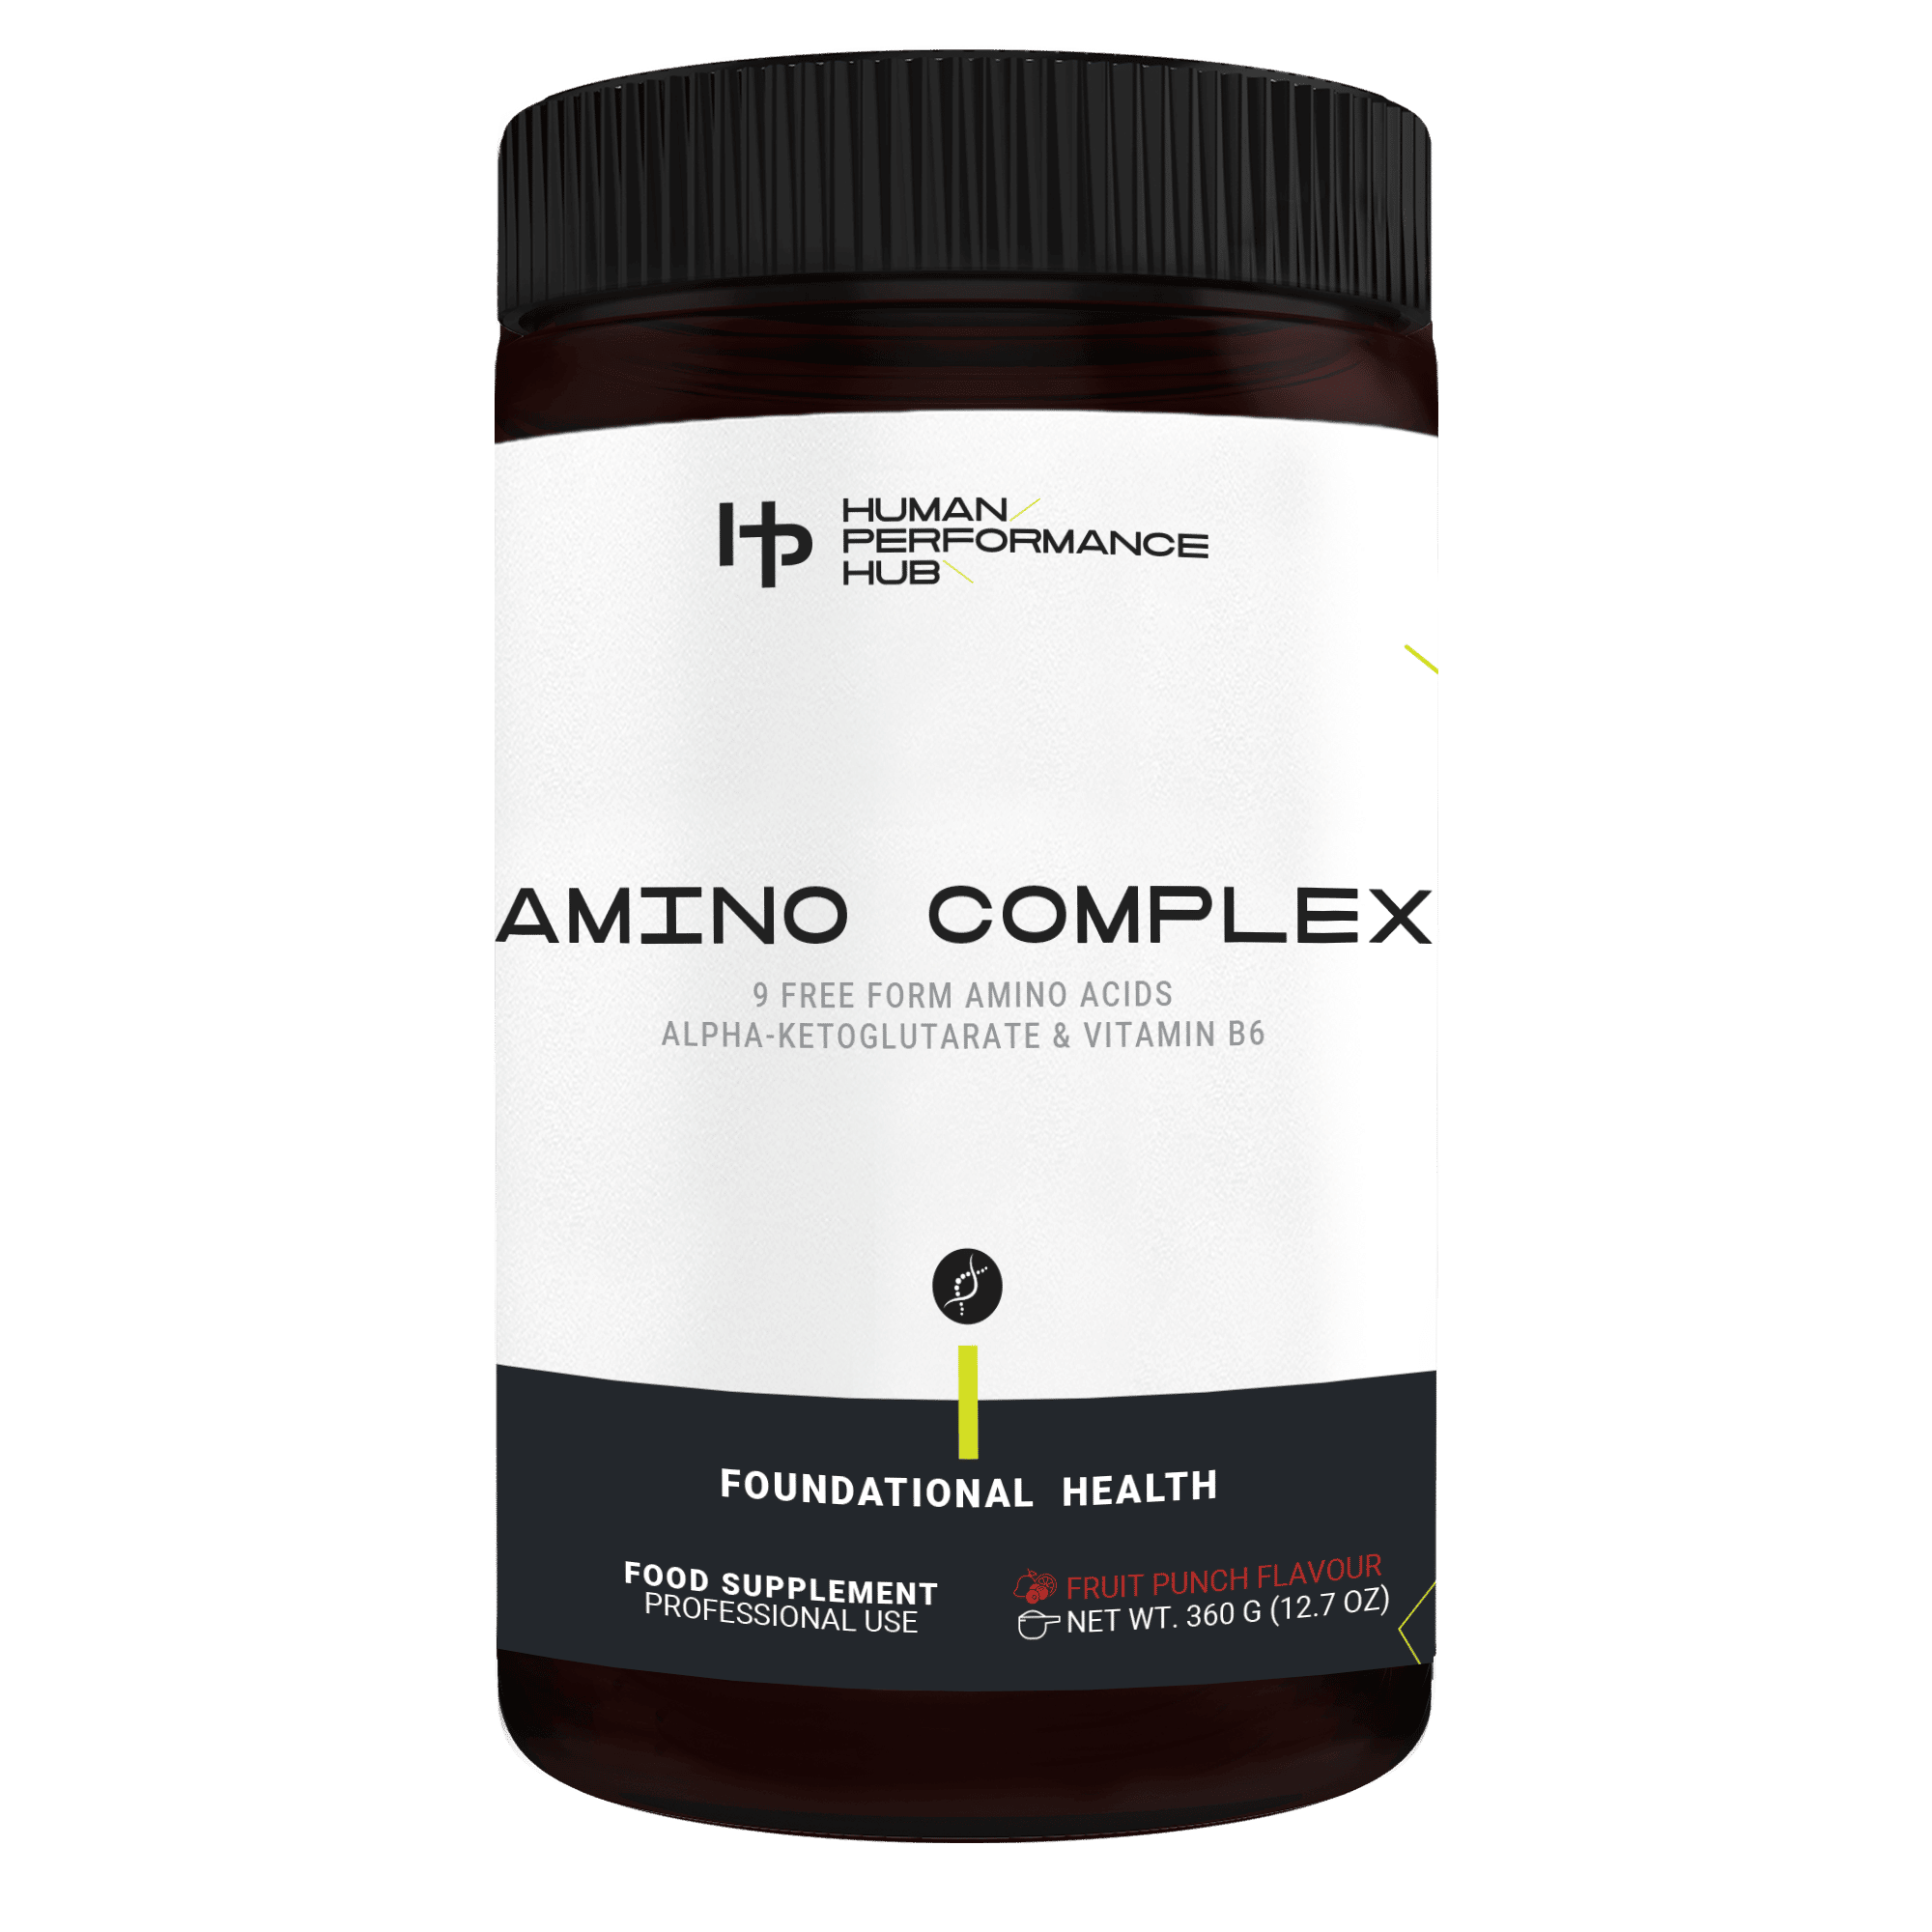 hph-amino-acid-complex-fruit-punch-contains-9-free-form-amino-acids